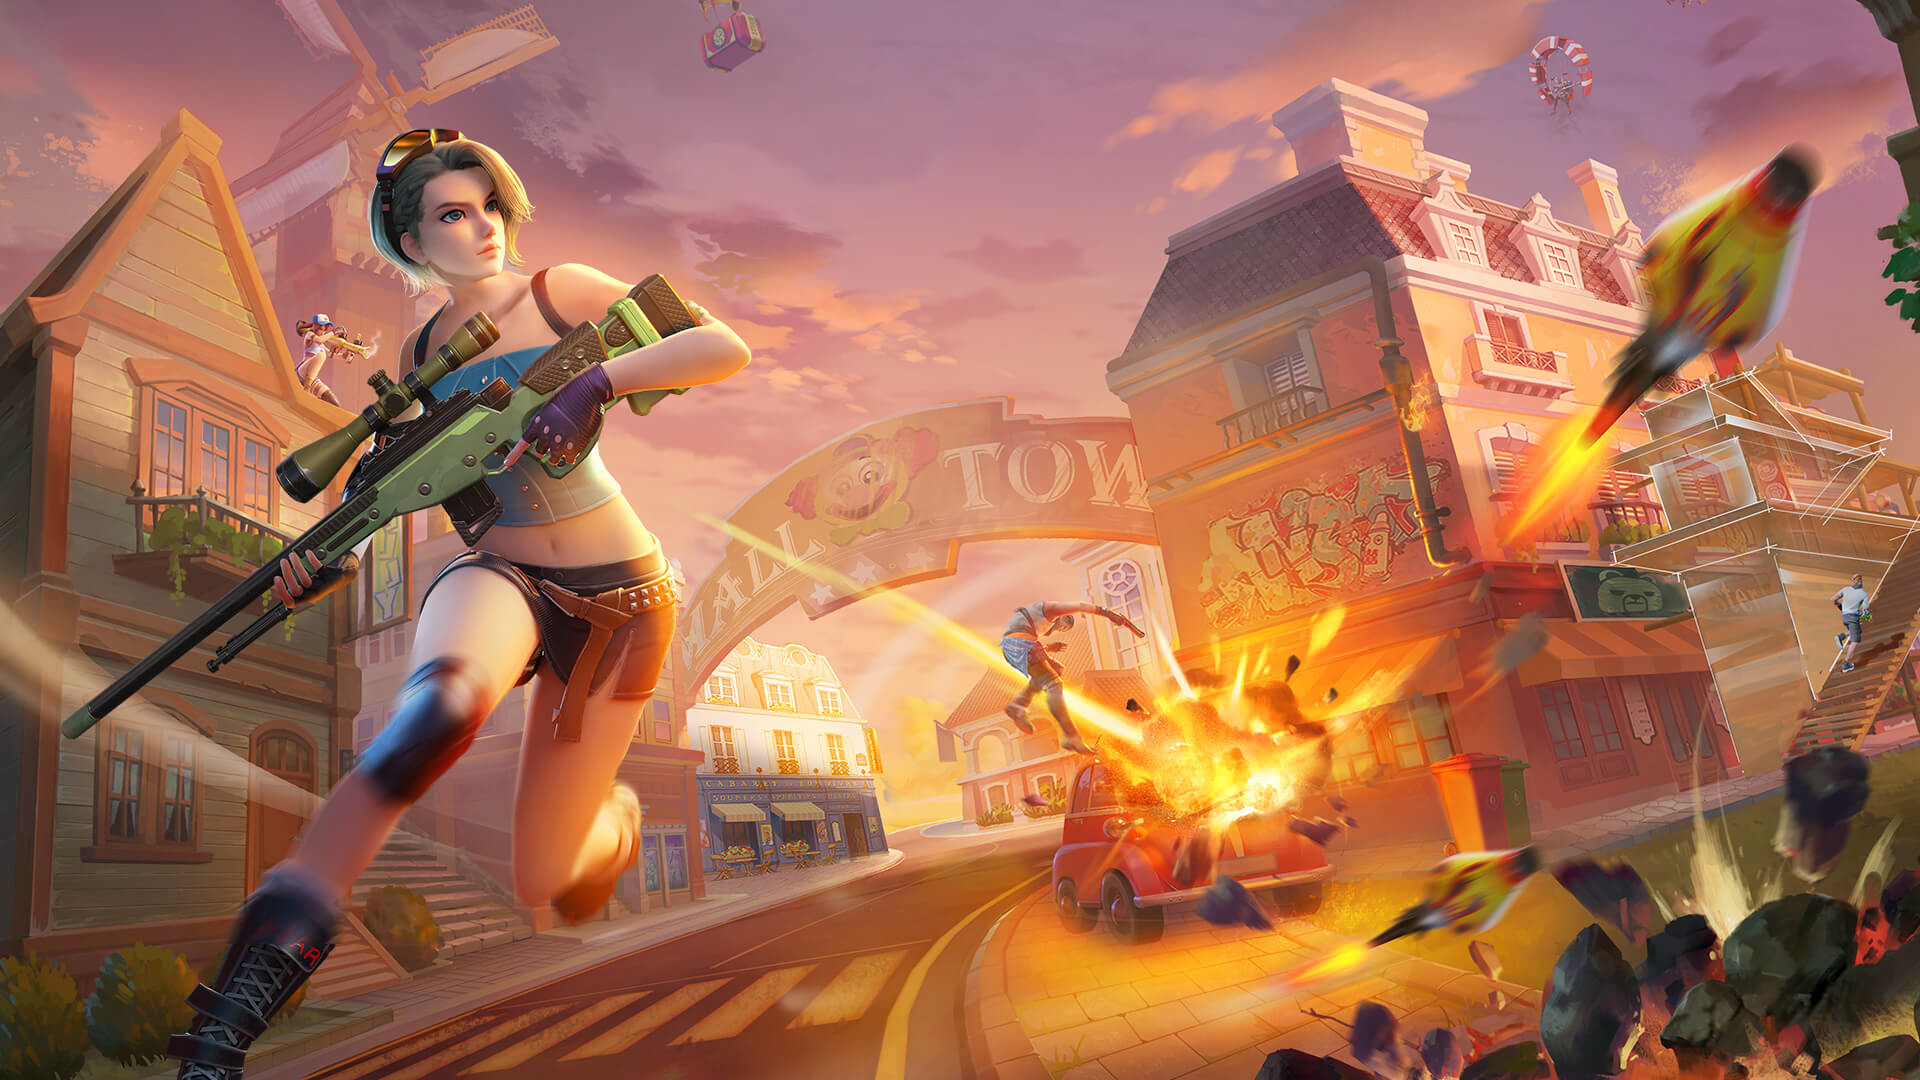 3840x21602019 Creative Destruction 3840x21602019 Resolution Wallpaper, HD  Games 4K Wallpapers, Images, Photos and Background - Wallpapers Den